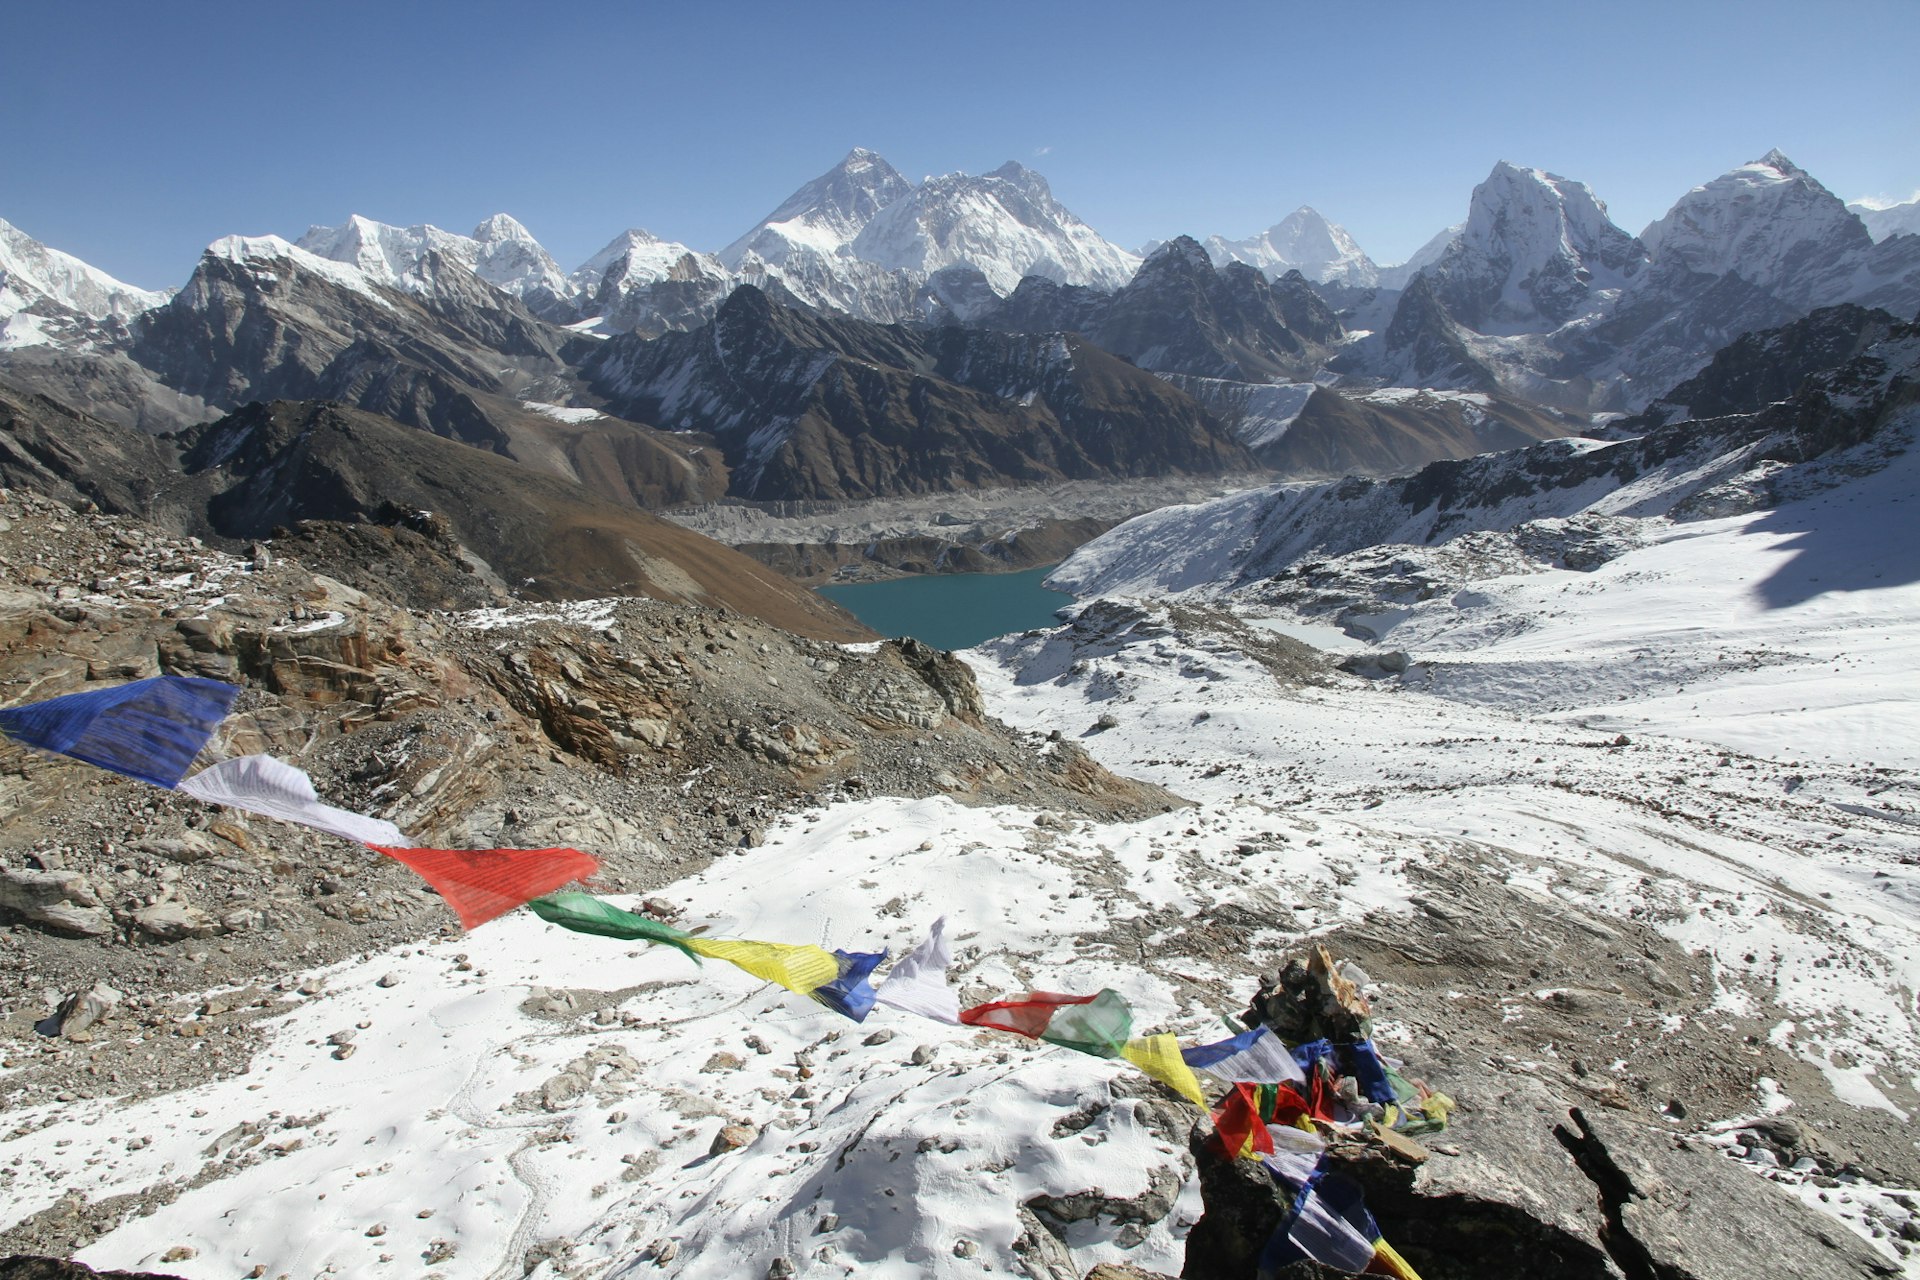 Views over Gokyo lake and Everest from the Renjo La. Image by Bradley Mayhew/ Lonely Planet